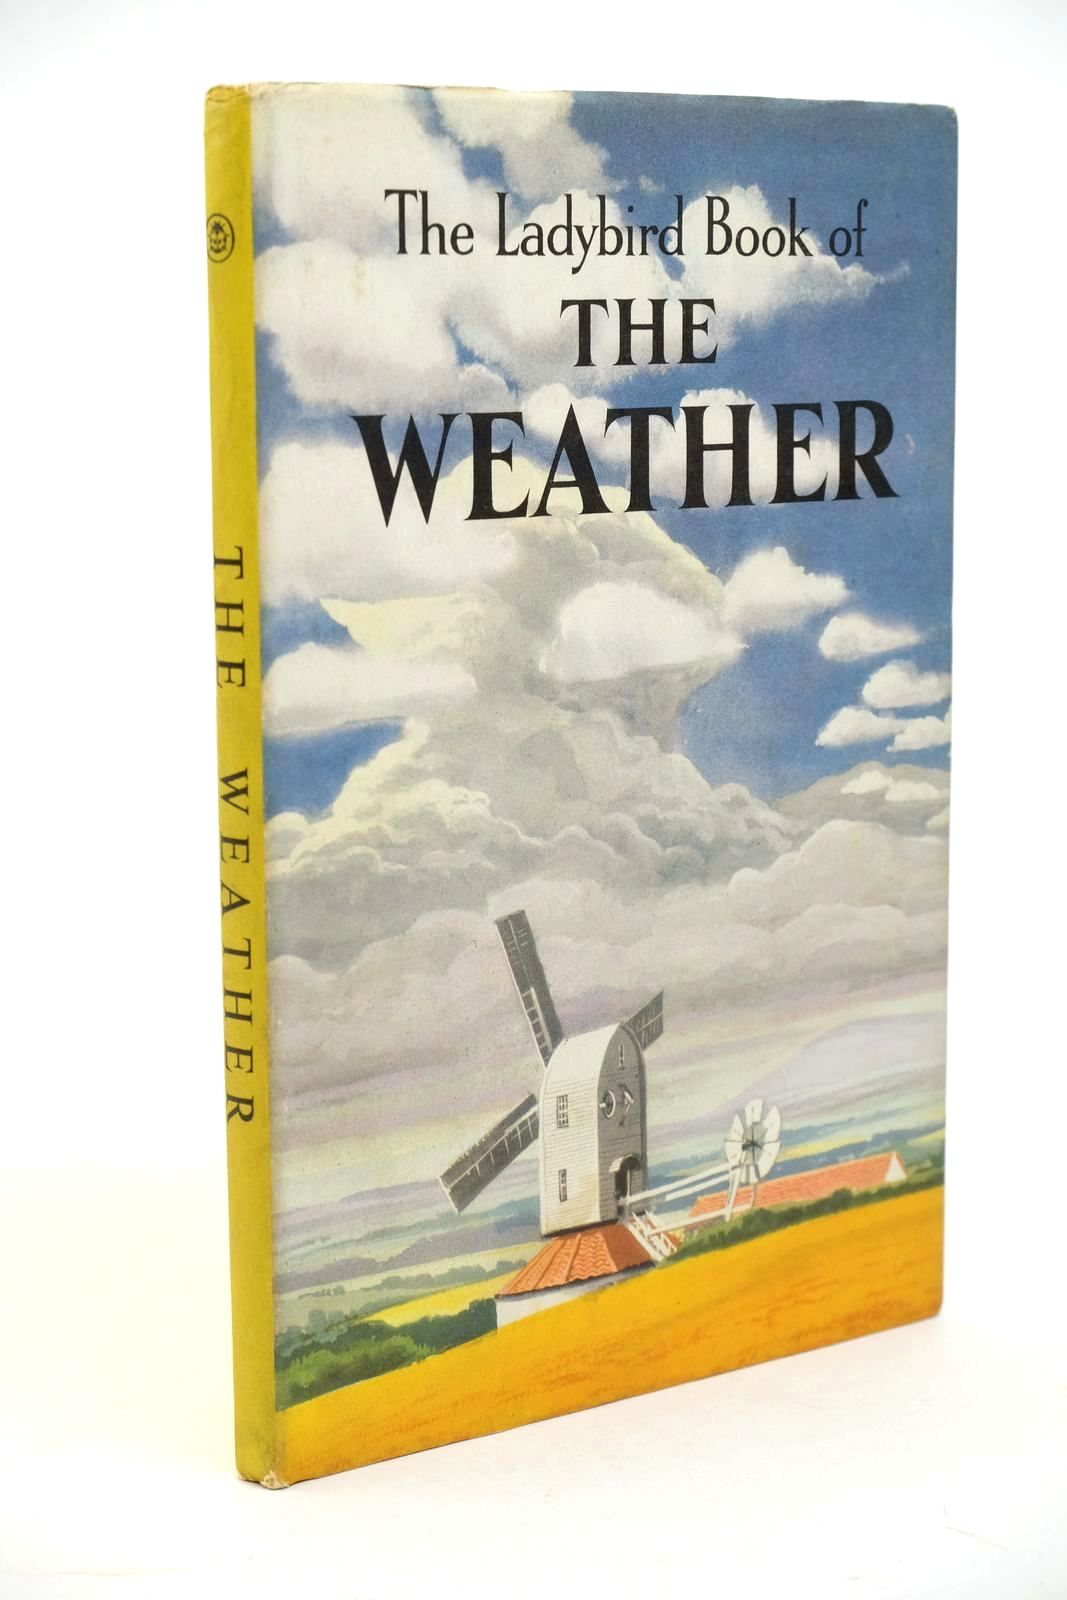 Photo of THE LADYBIRD BOOK OF THE WEATHER written by Newing, F.E.
Bowood, Richard illustrated by Ayton, Robert published by Wills & Hepworth Ltd. (STOCK CODE: 1323149)  for sale by Stella & Rose's Books